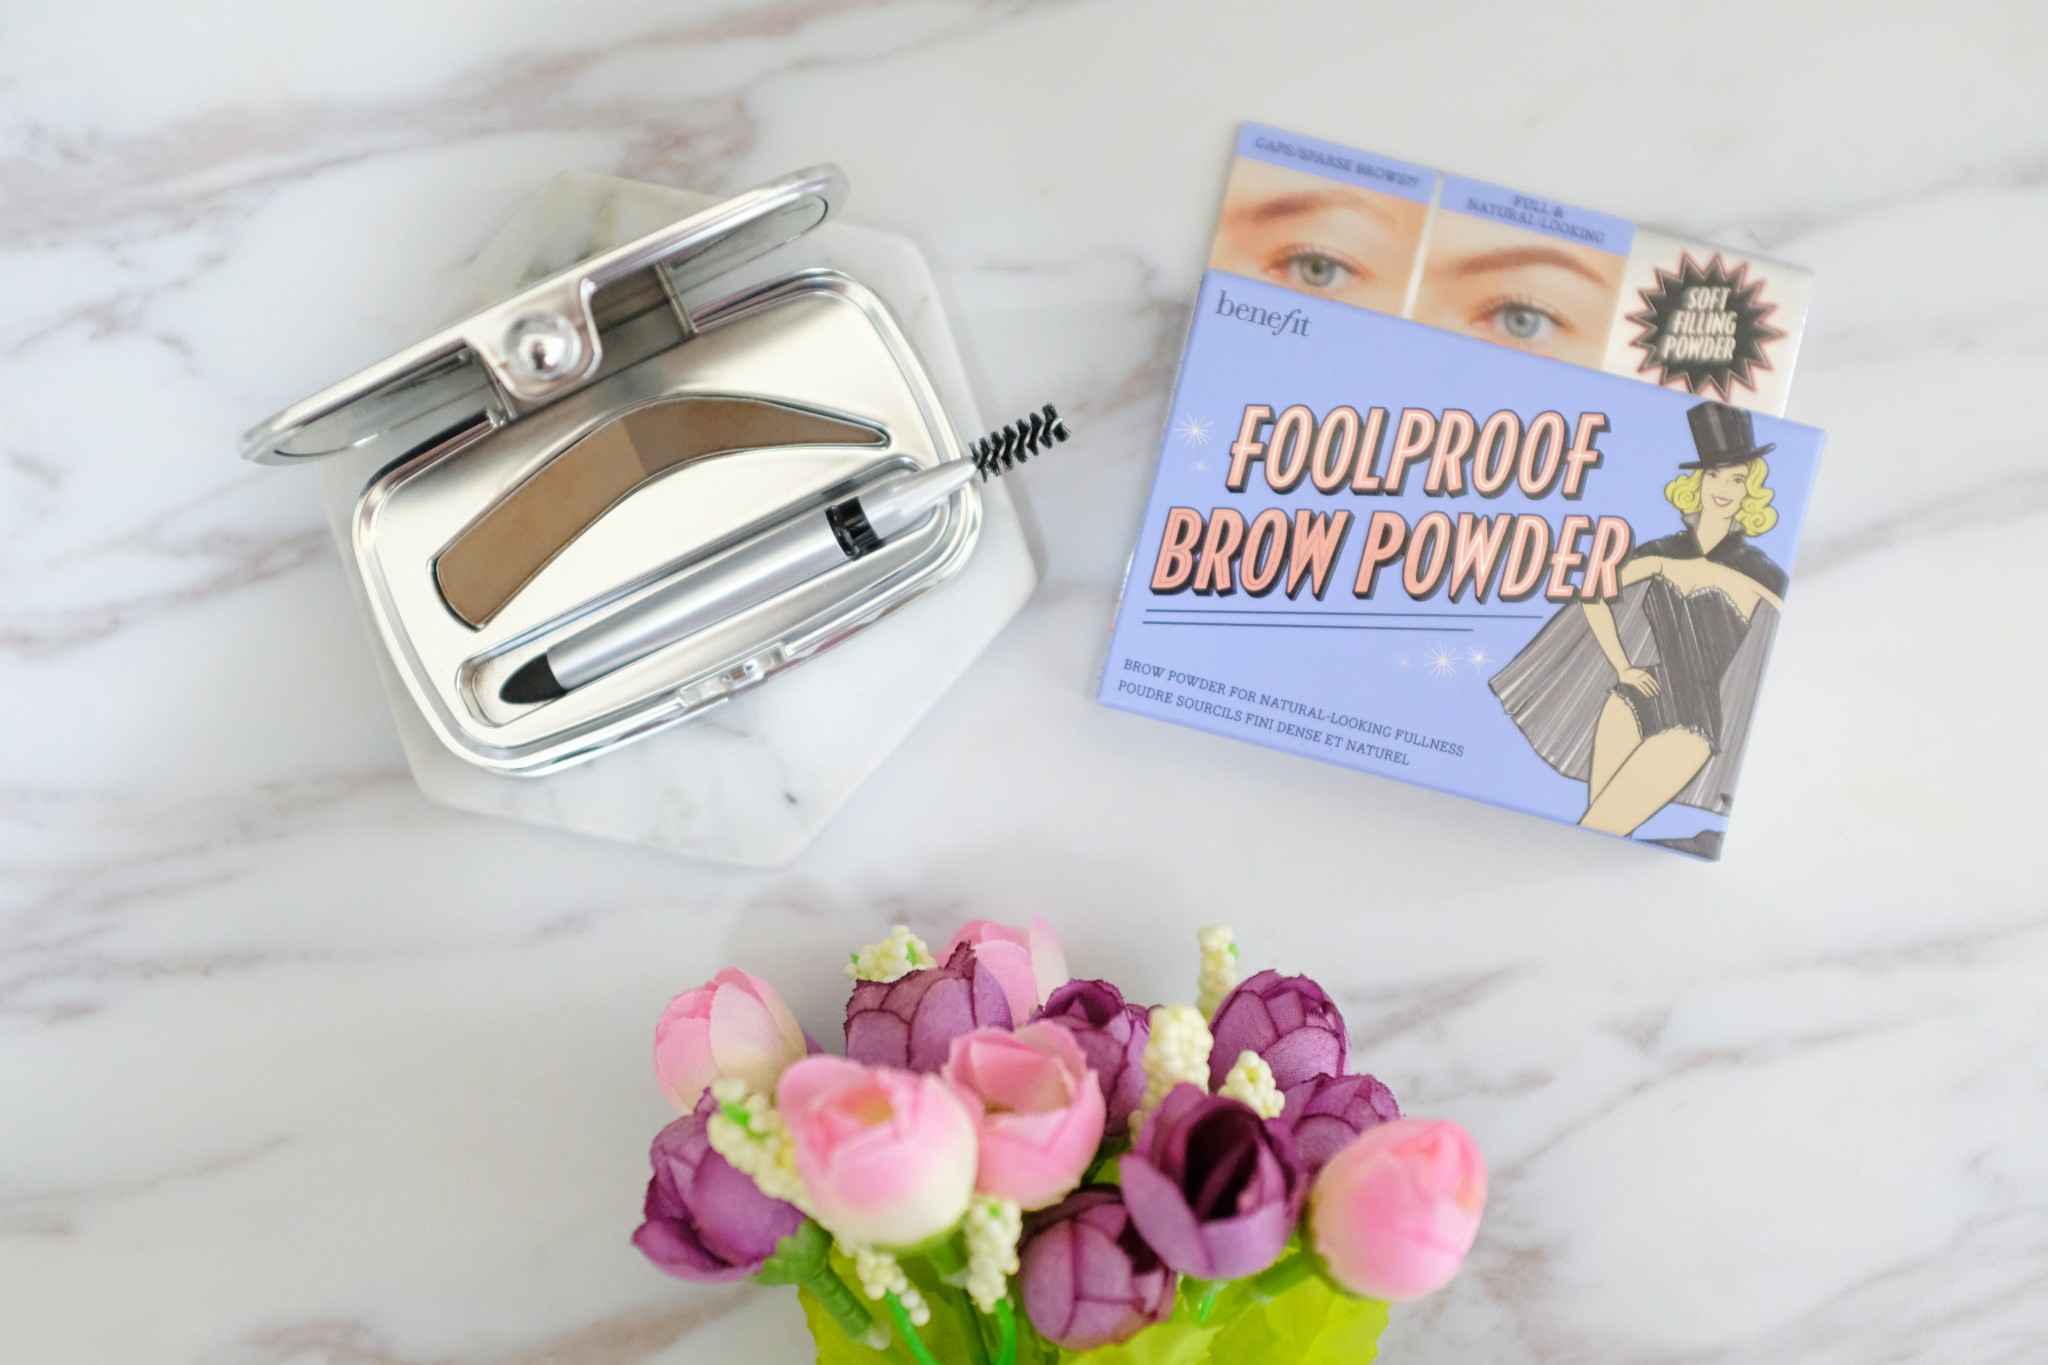 New In: Benefit Foolproof Brow Powder